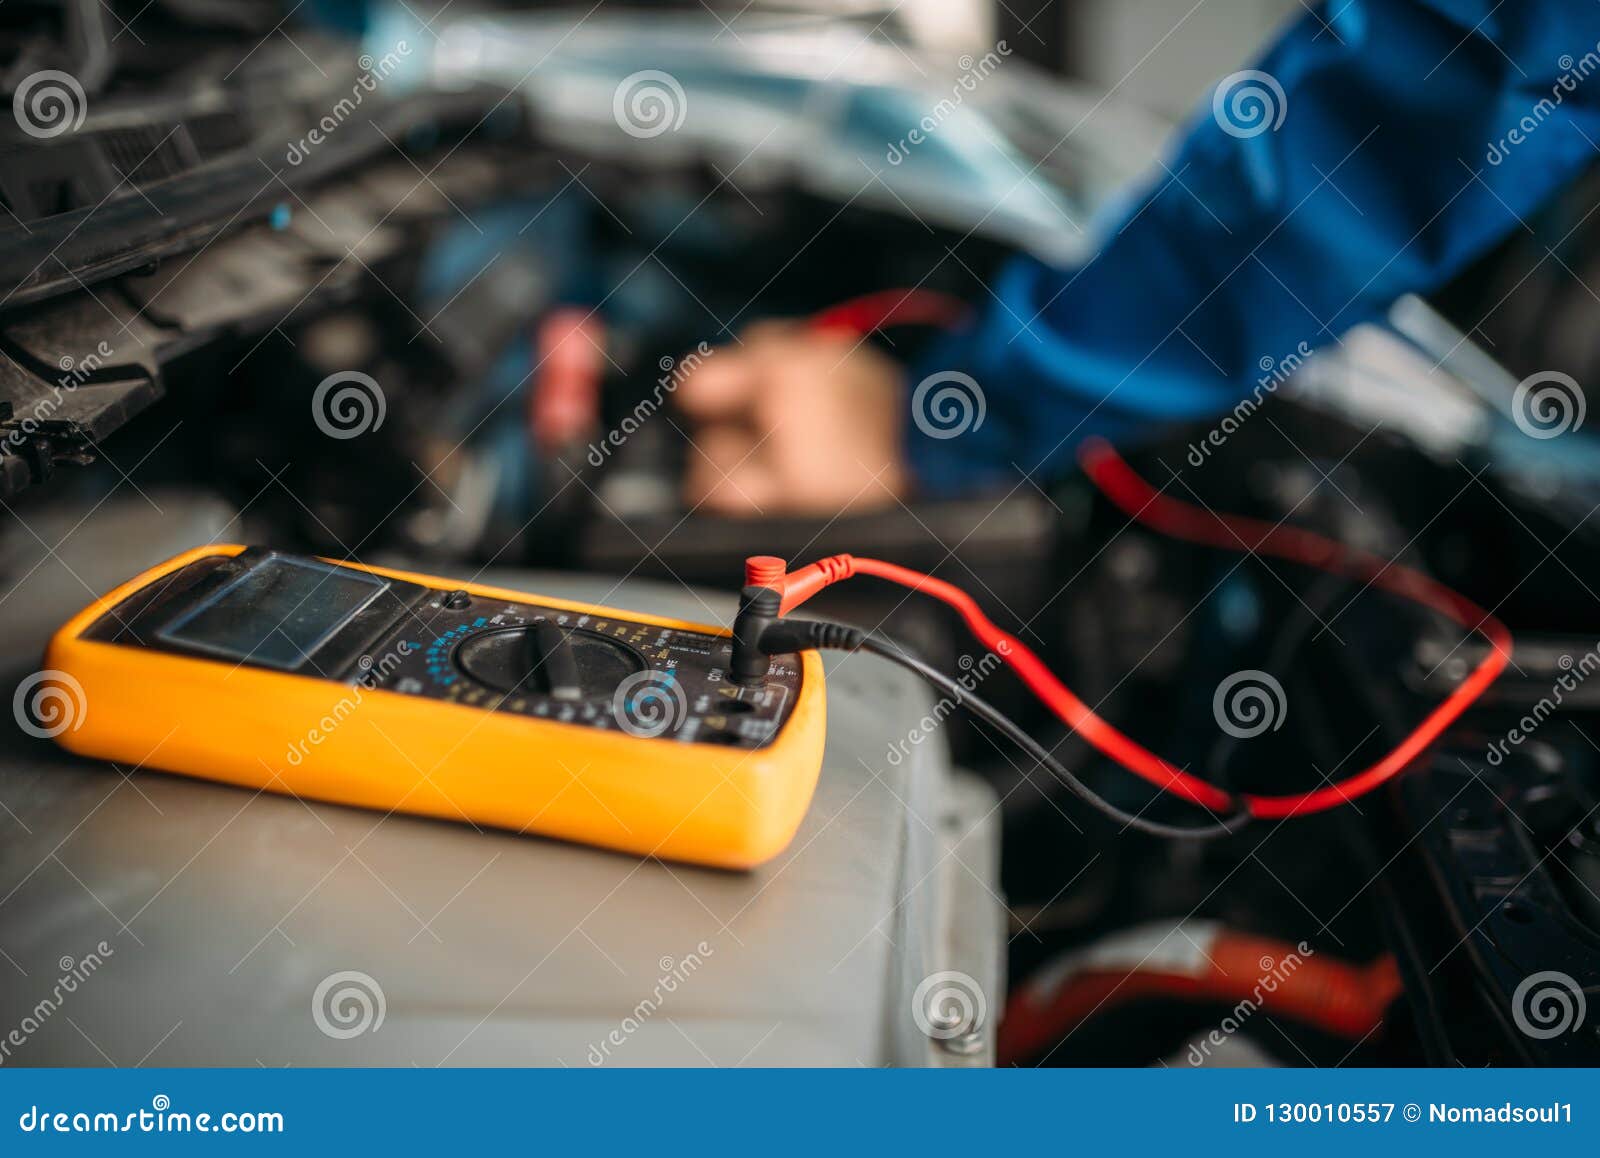 car repairman with multimeter, battery inspection